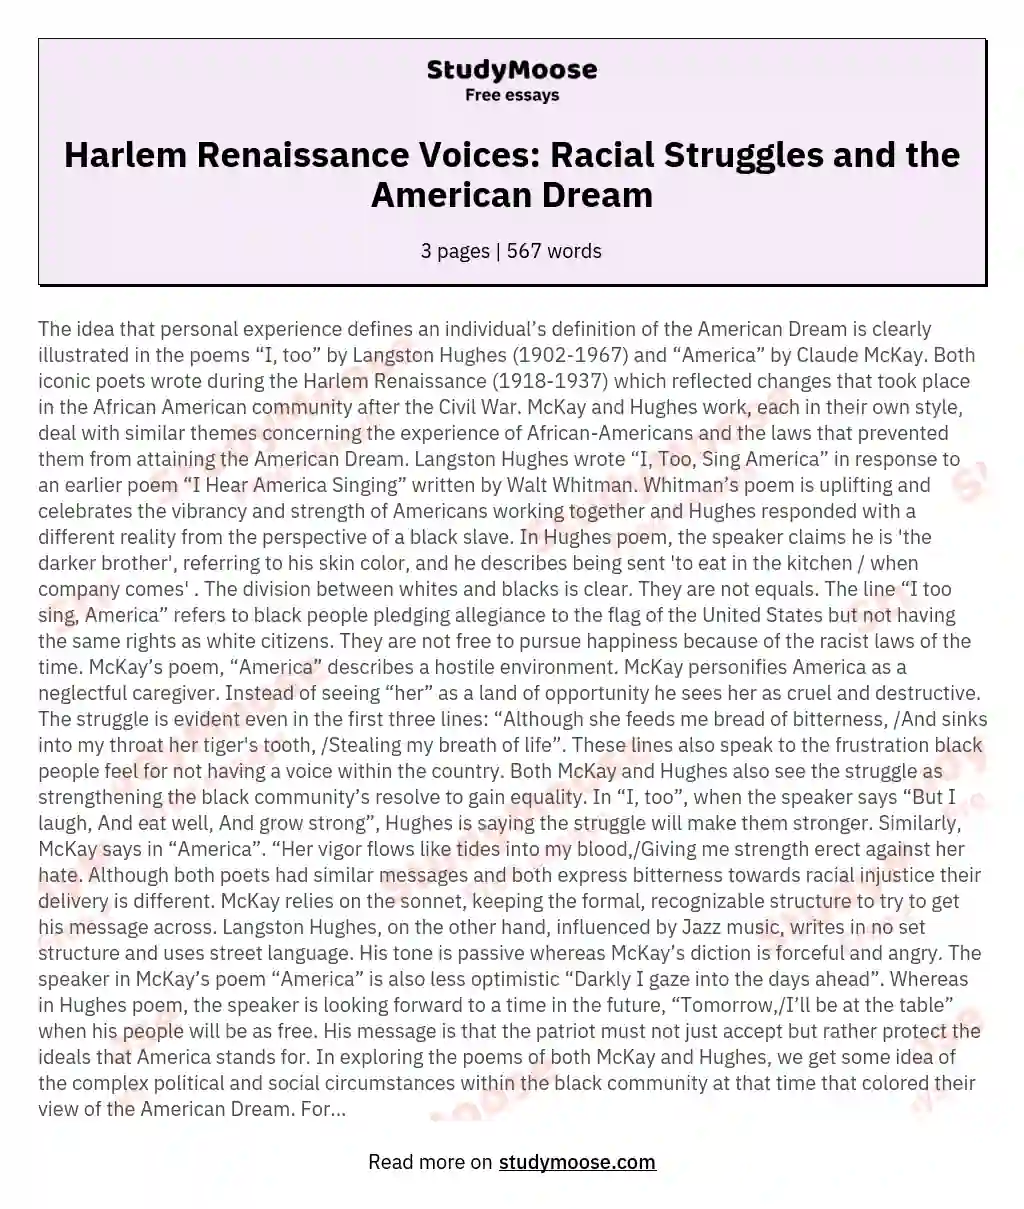 Harlem Renaissance Voices: Racial Struggles and the American Dream essay